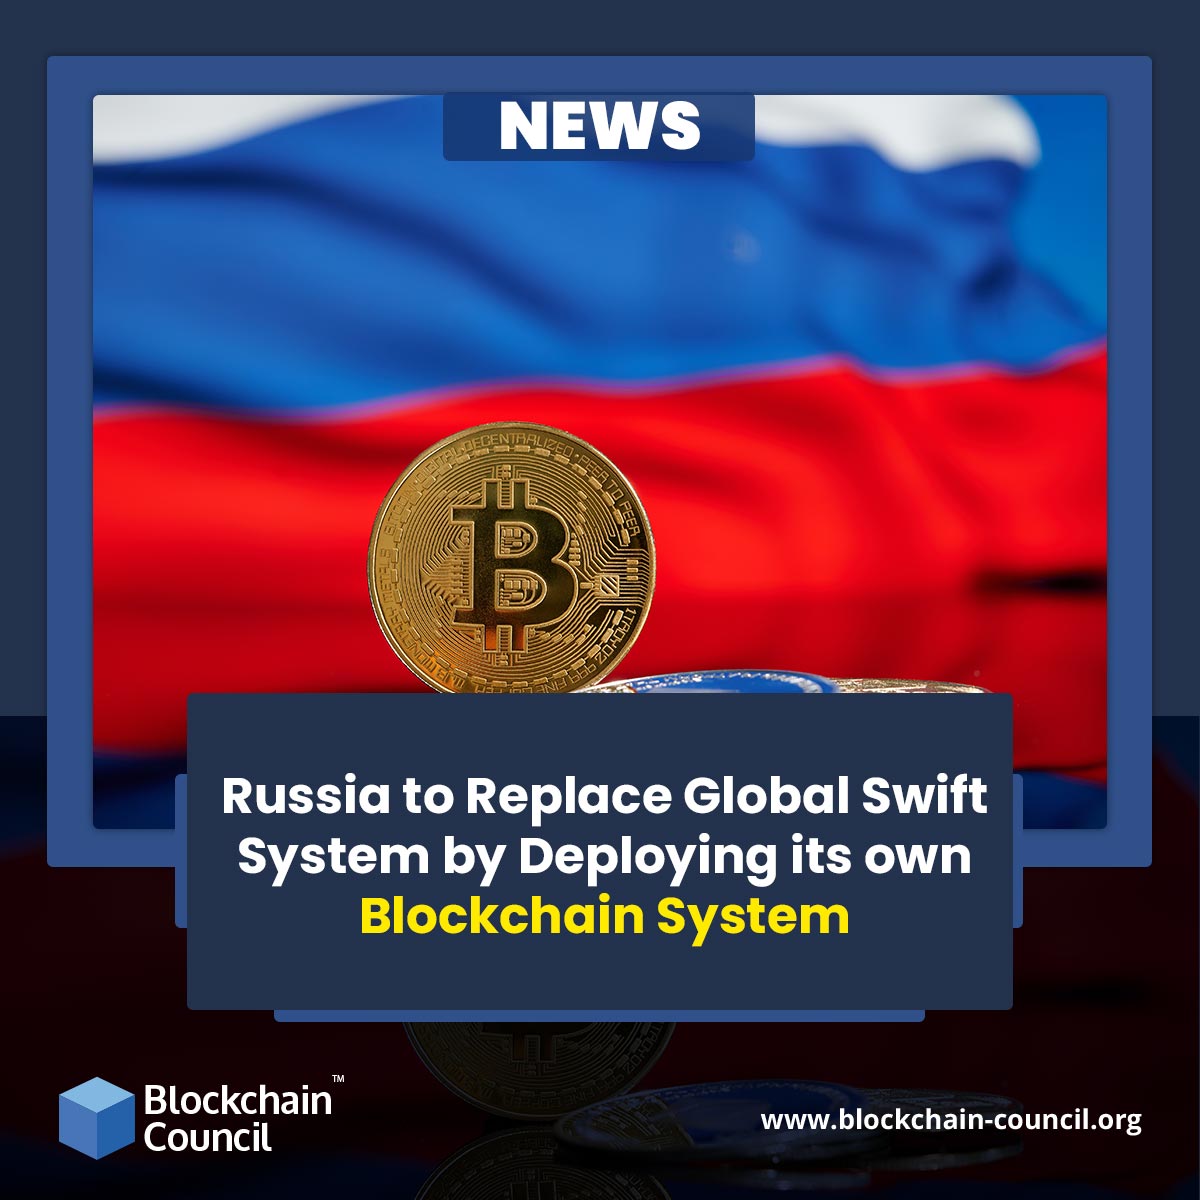 Russia to Replace Global Swift System by Deploying its own Blockchain System